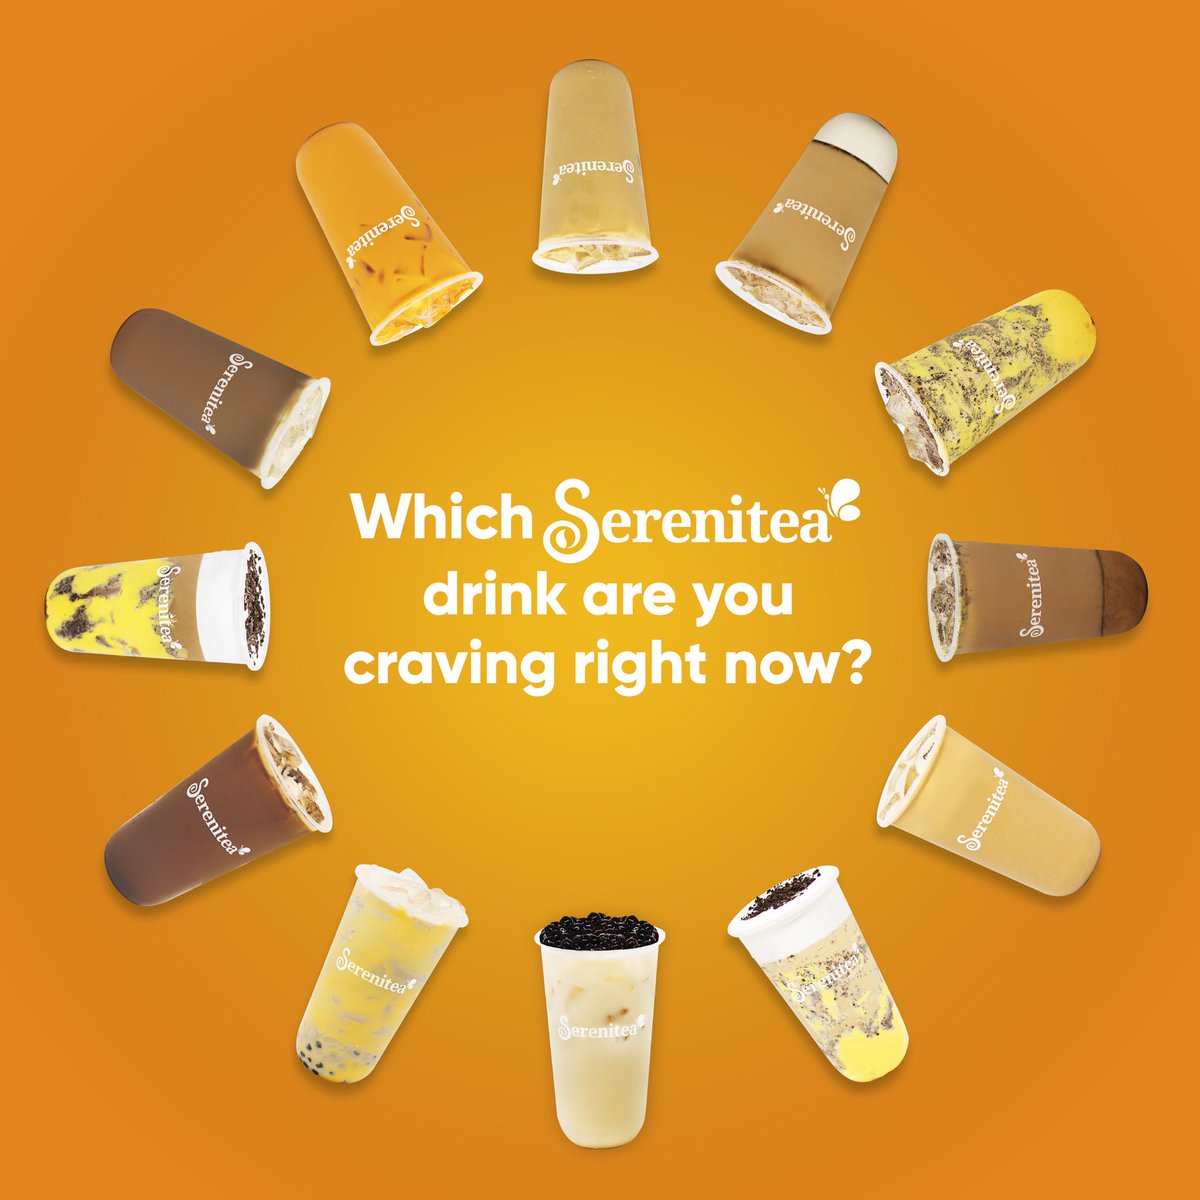 Let us know in the comments below which drink would satisfy your cravings right now 🤤